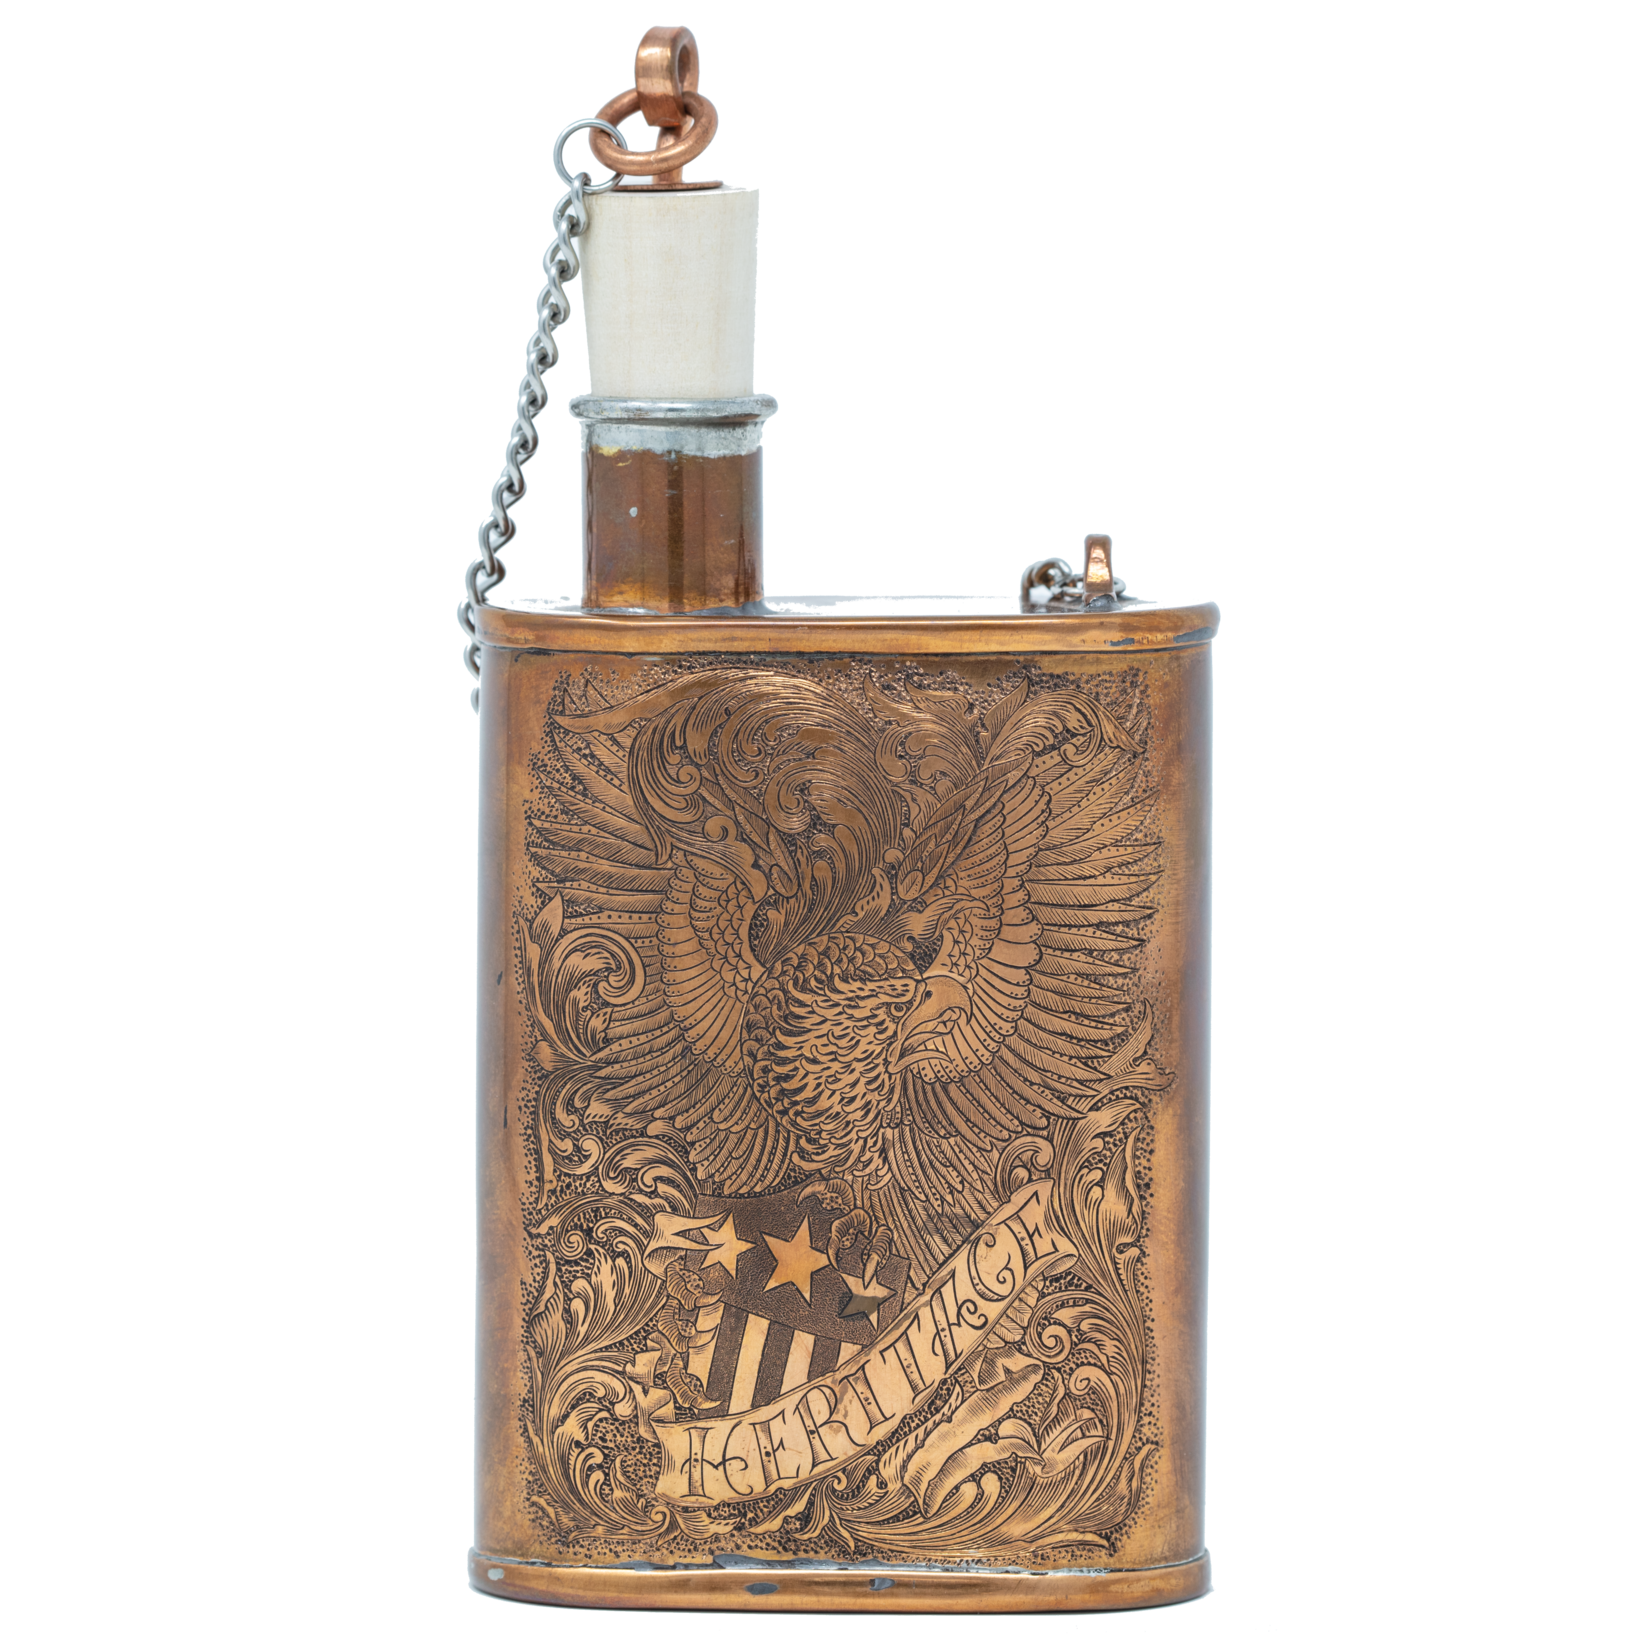 Handmade and Engraved Flask